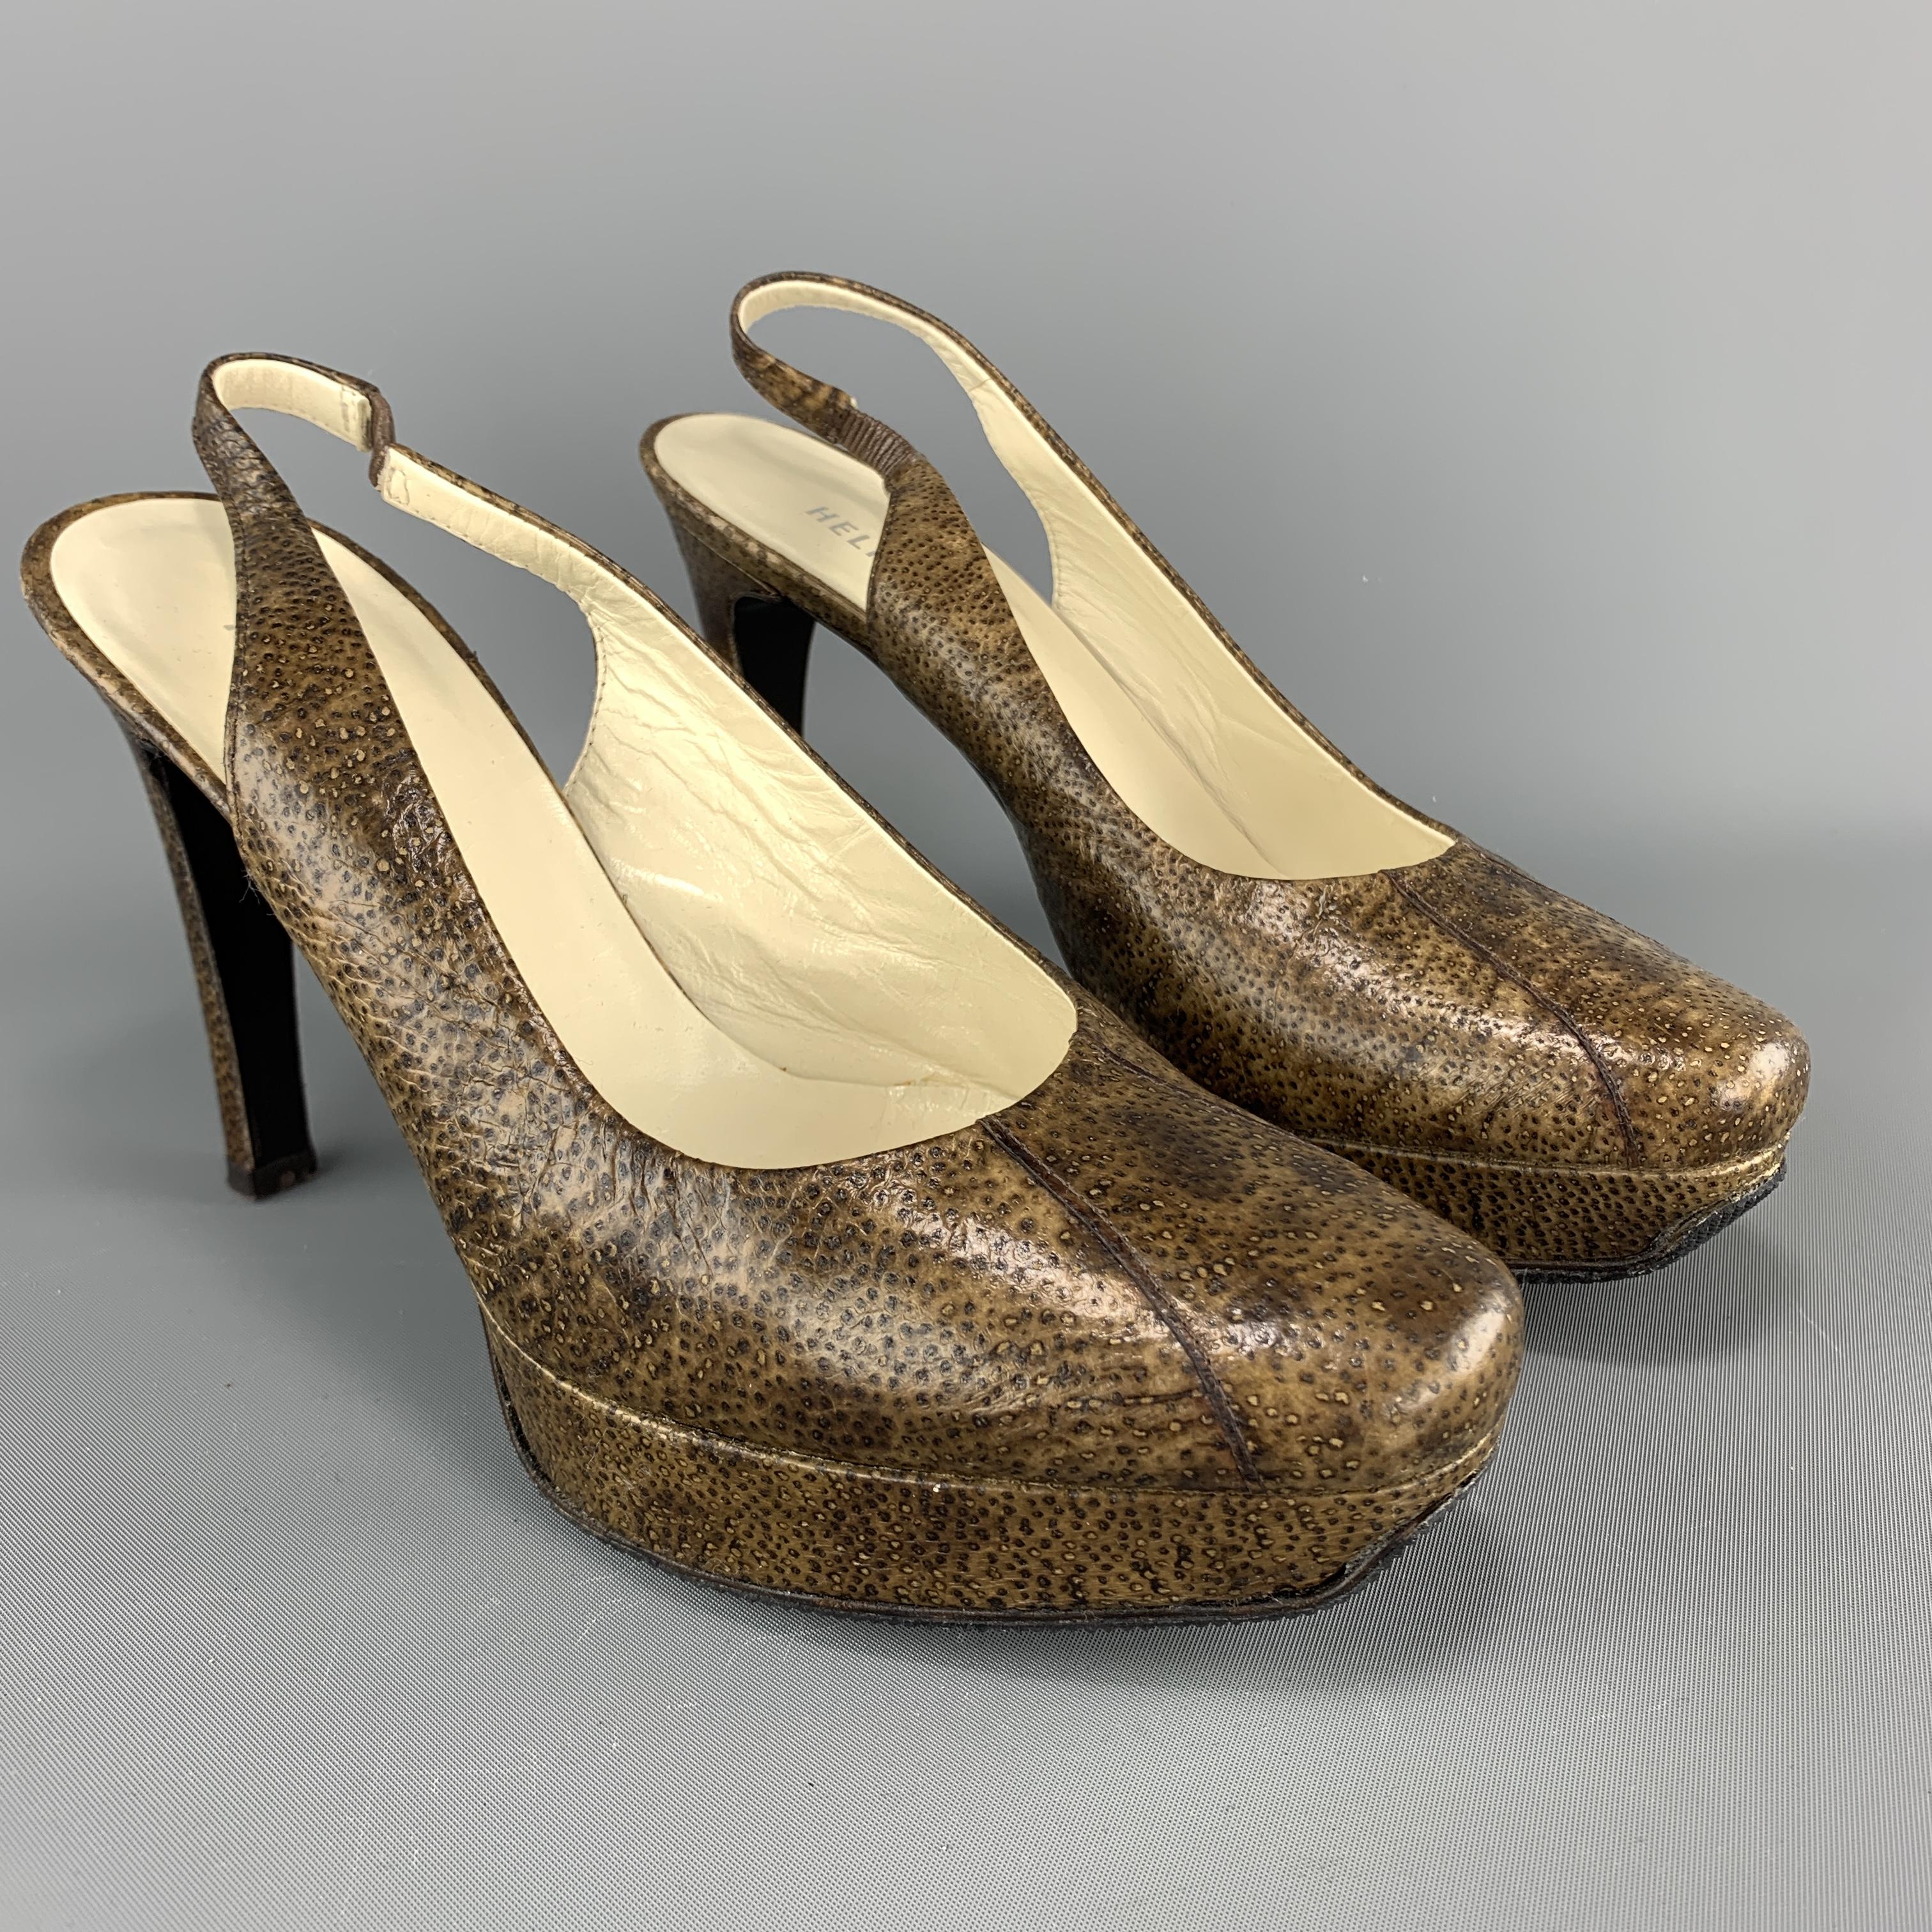 HELMUT LANG pumps com in brown textured leather with a squared point platform toe, slingback, and covered heel. Made in Italy.

Excellent Pre-Owned Condition.
Marked: IT 35.5

Measurements:

Heel: 4.25 in.
Platform: 0.75 in.